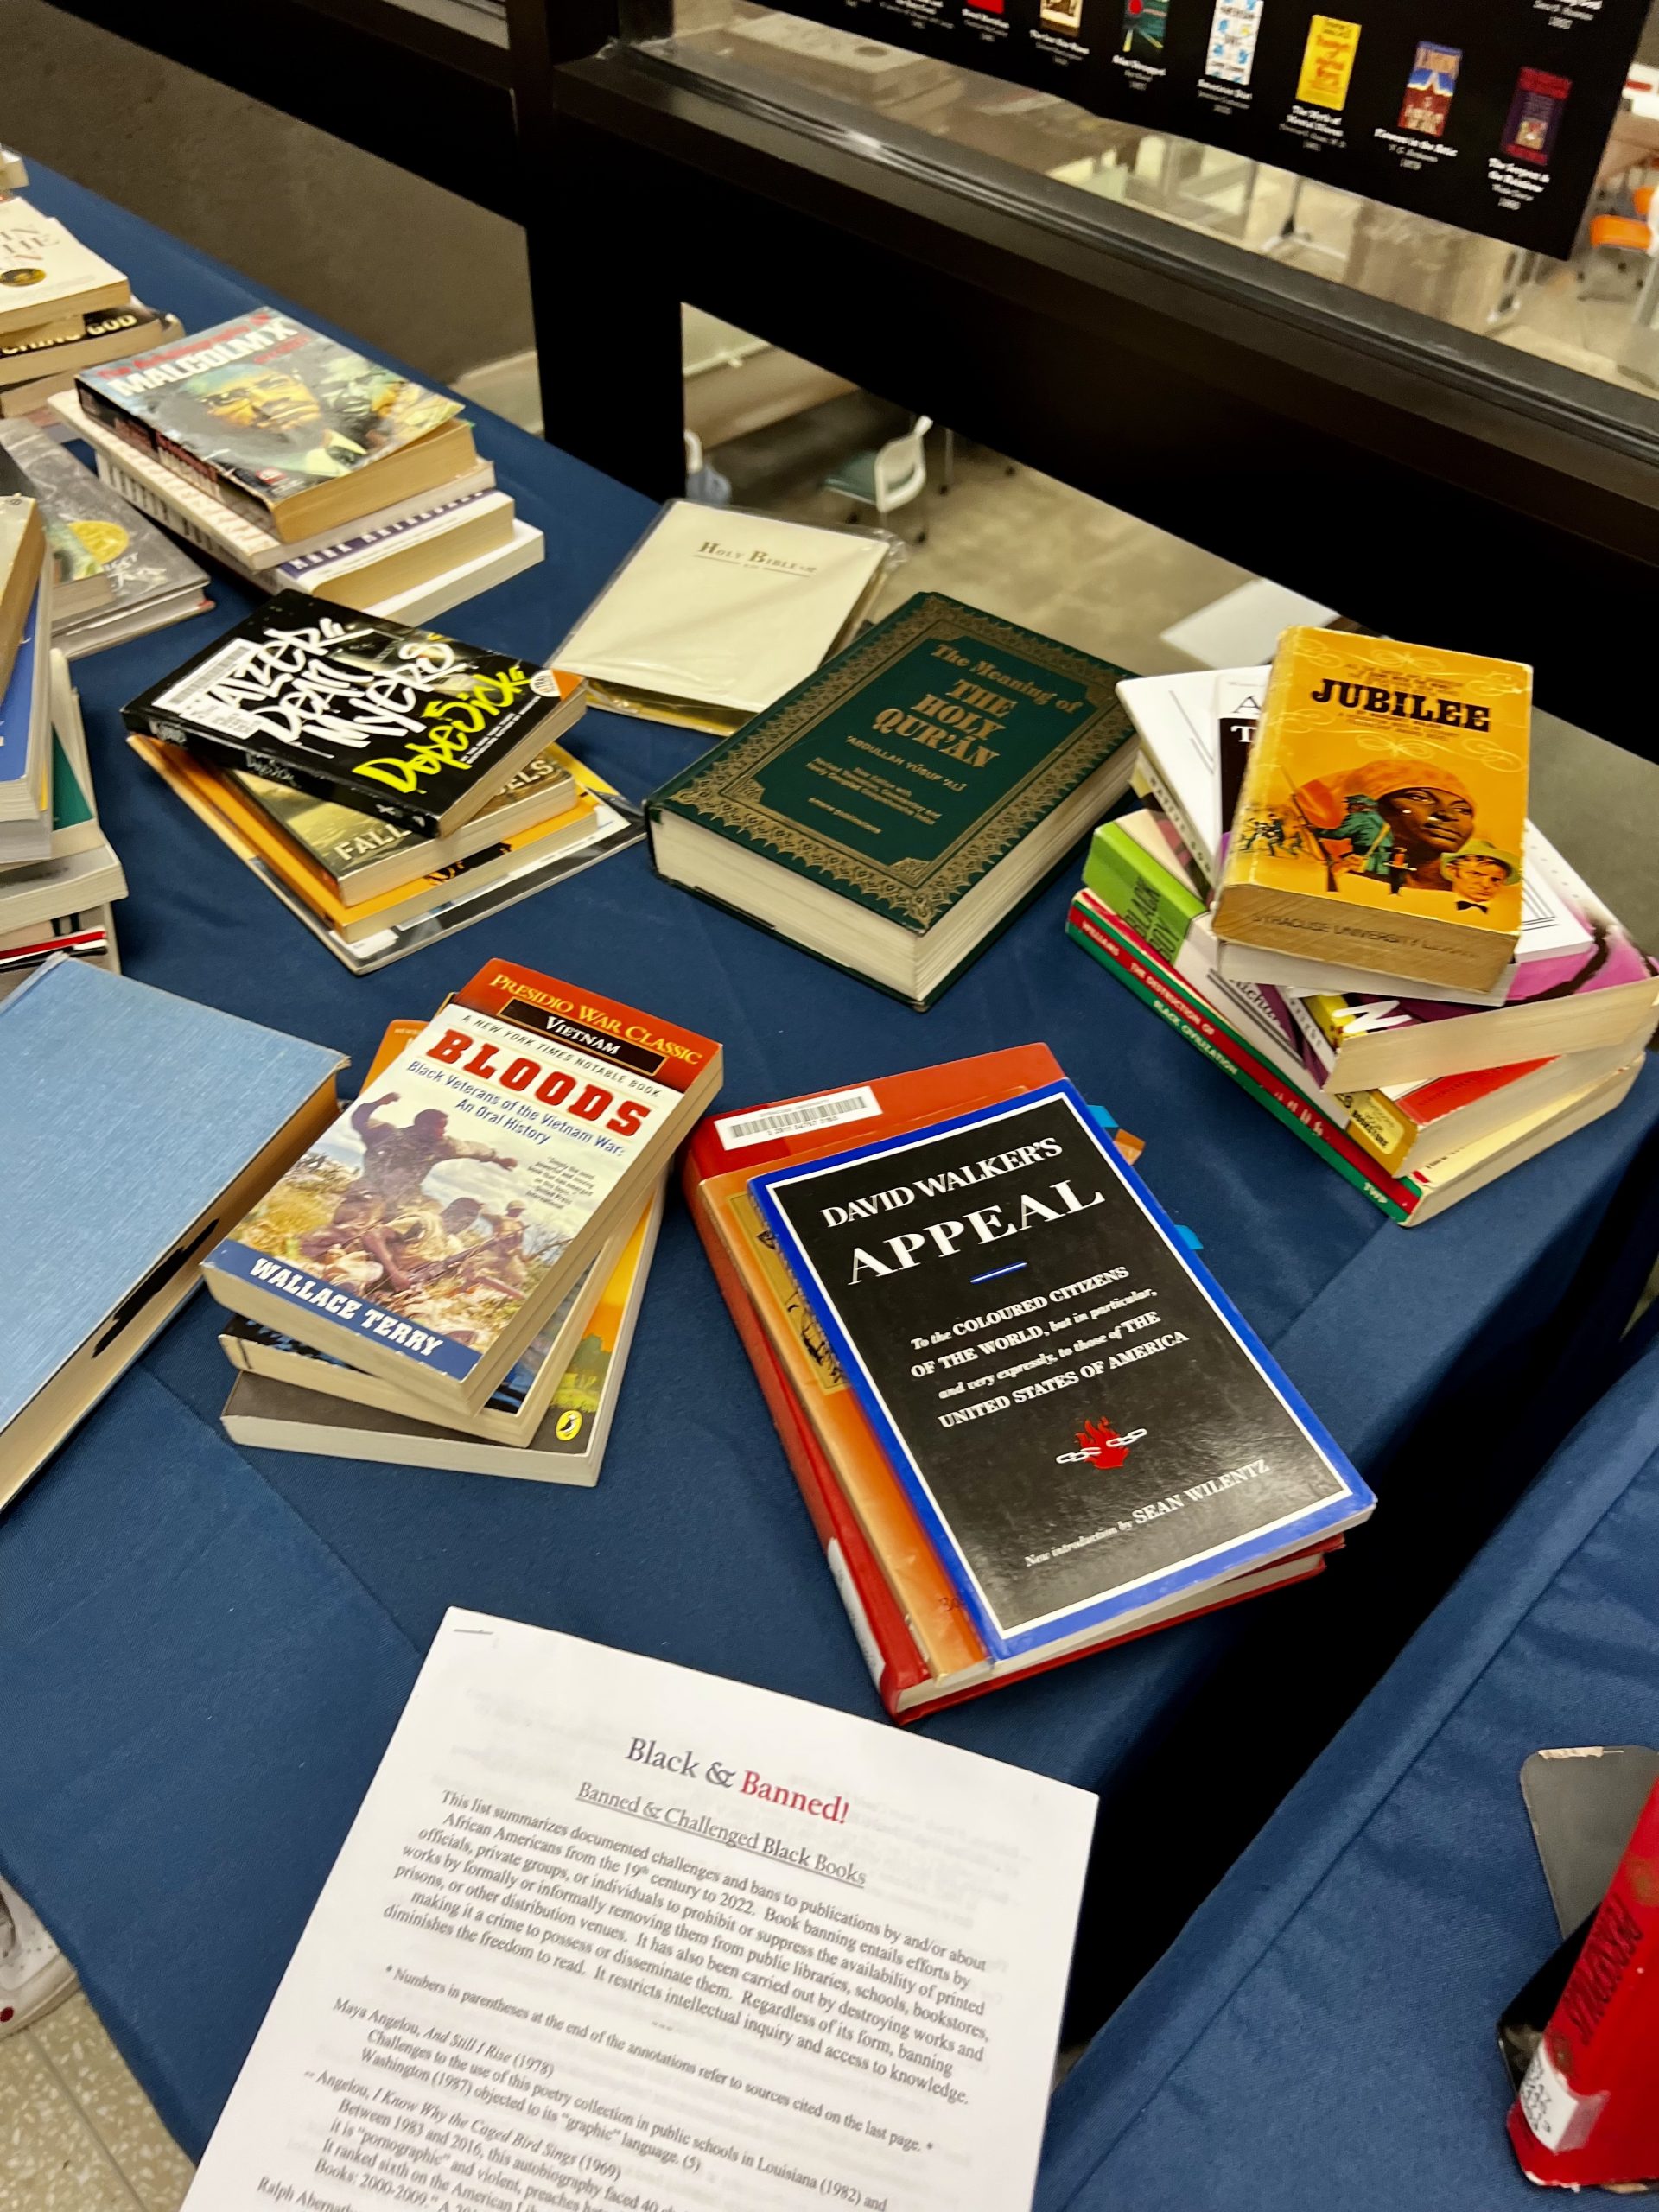 Various books are laid out and stacked near each other on a table with a blue tablecloth.